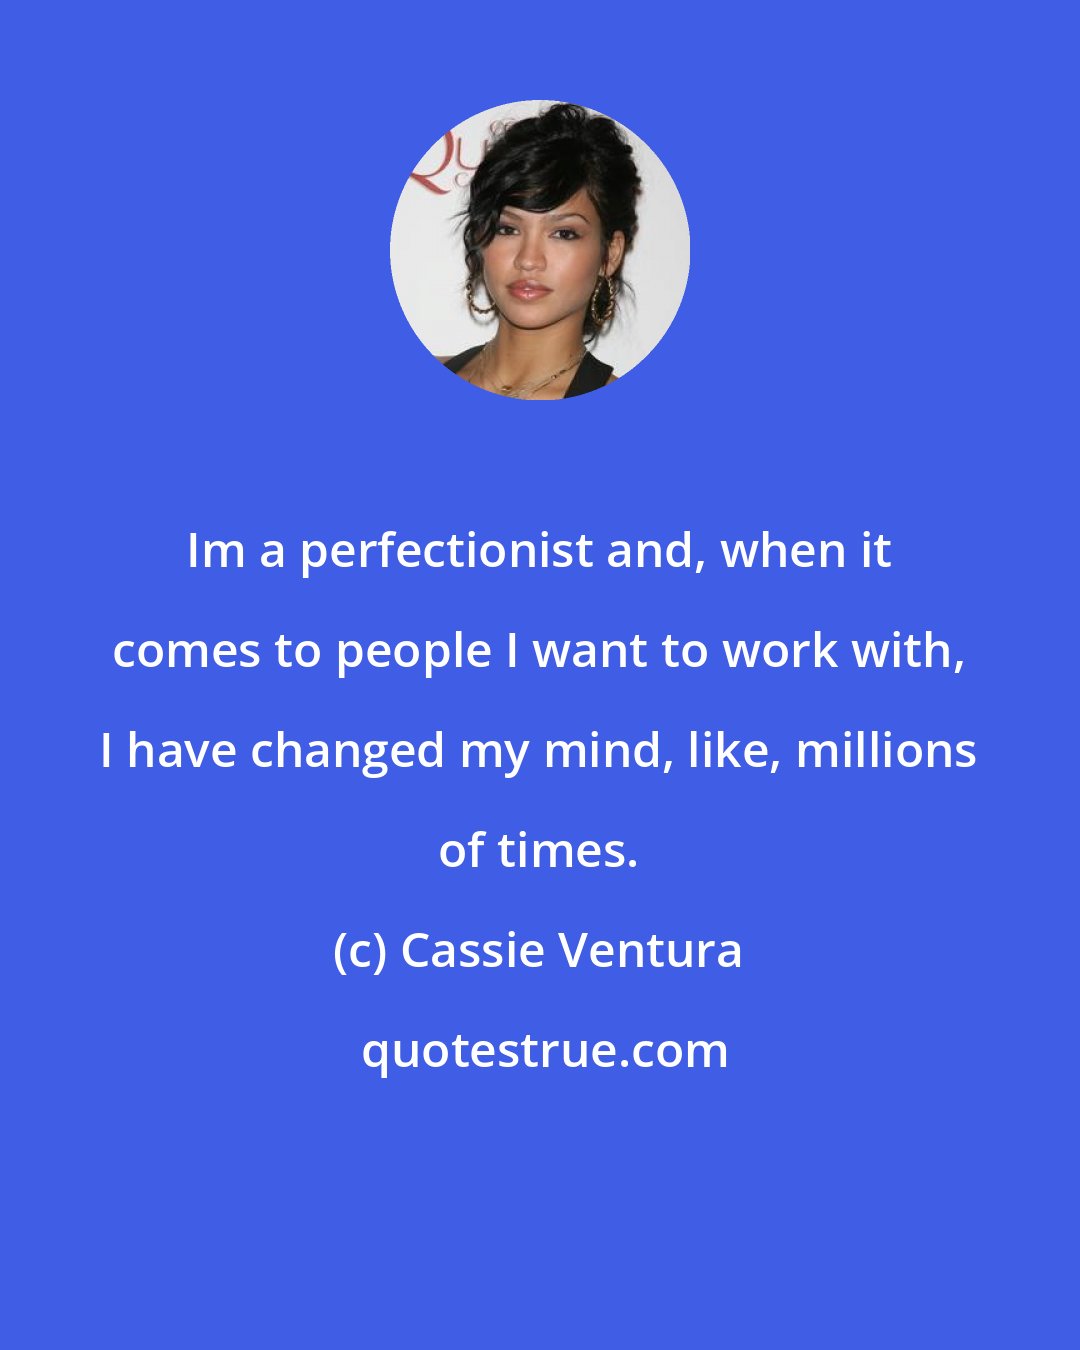 Cassie Ventura: Im a perfectionist and, when it comes to people I want to work with, I have changed my mind, like, millions of times.